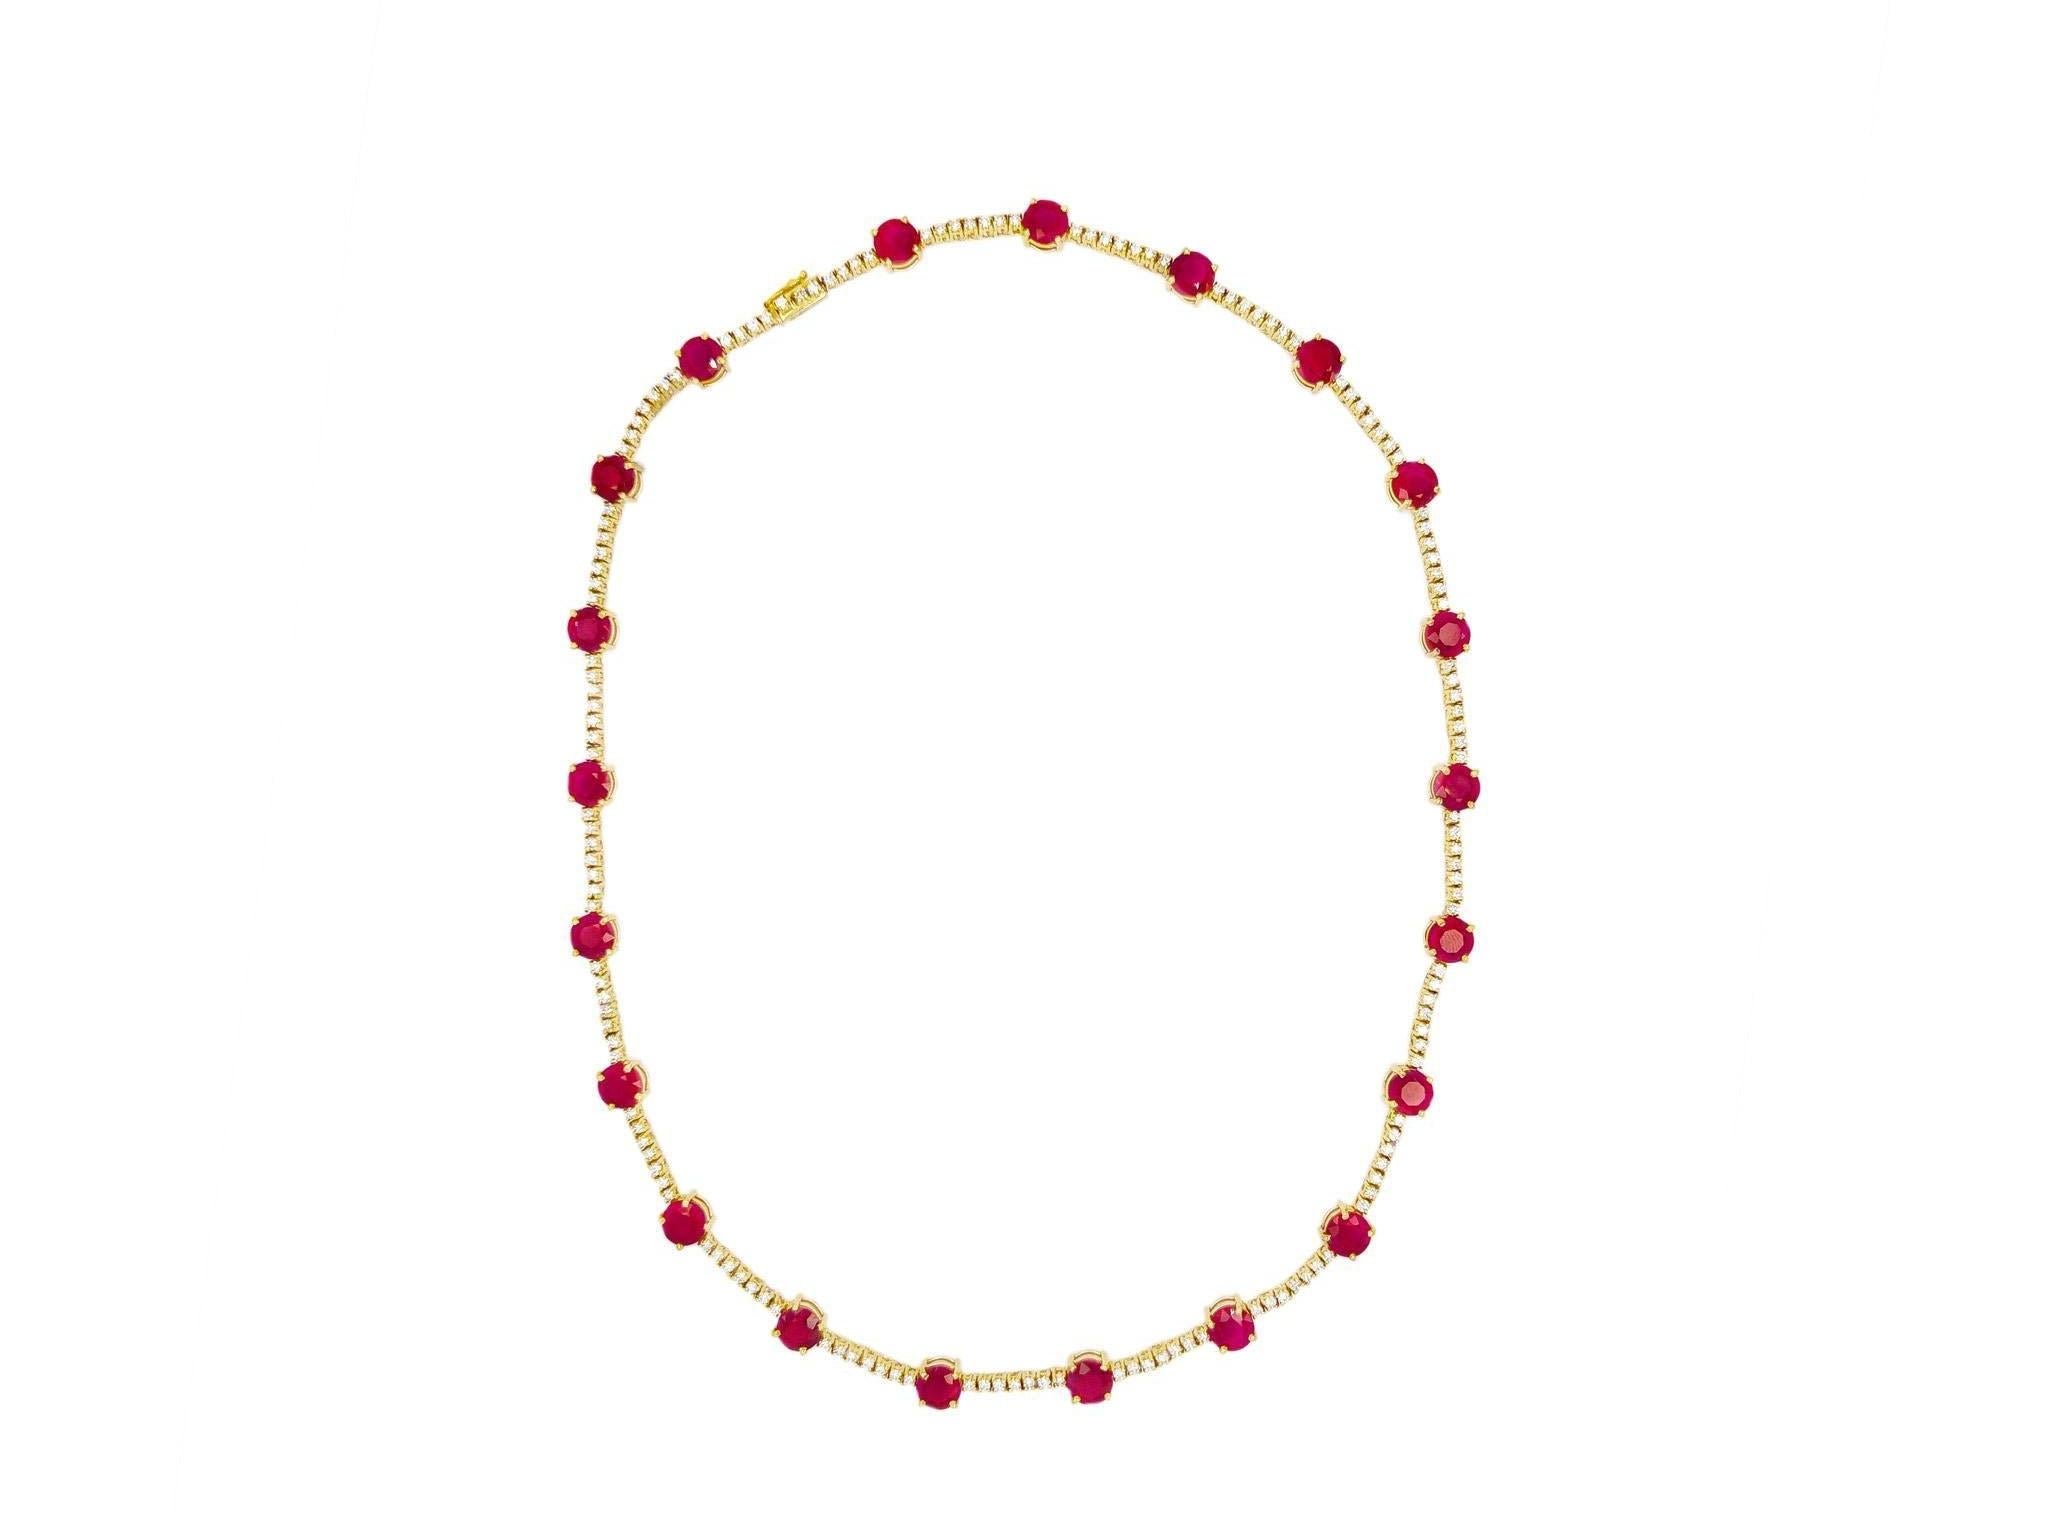 Art Deco Round Cut 25.10 Carats Ruby Necklace with 2.48 Carats of Diamonds 18K Gold For Sale